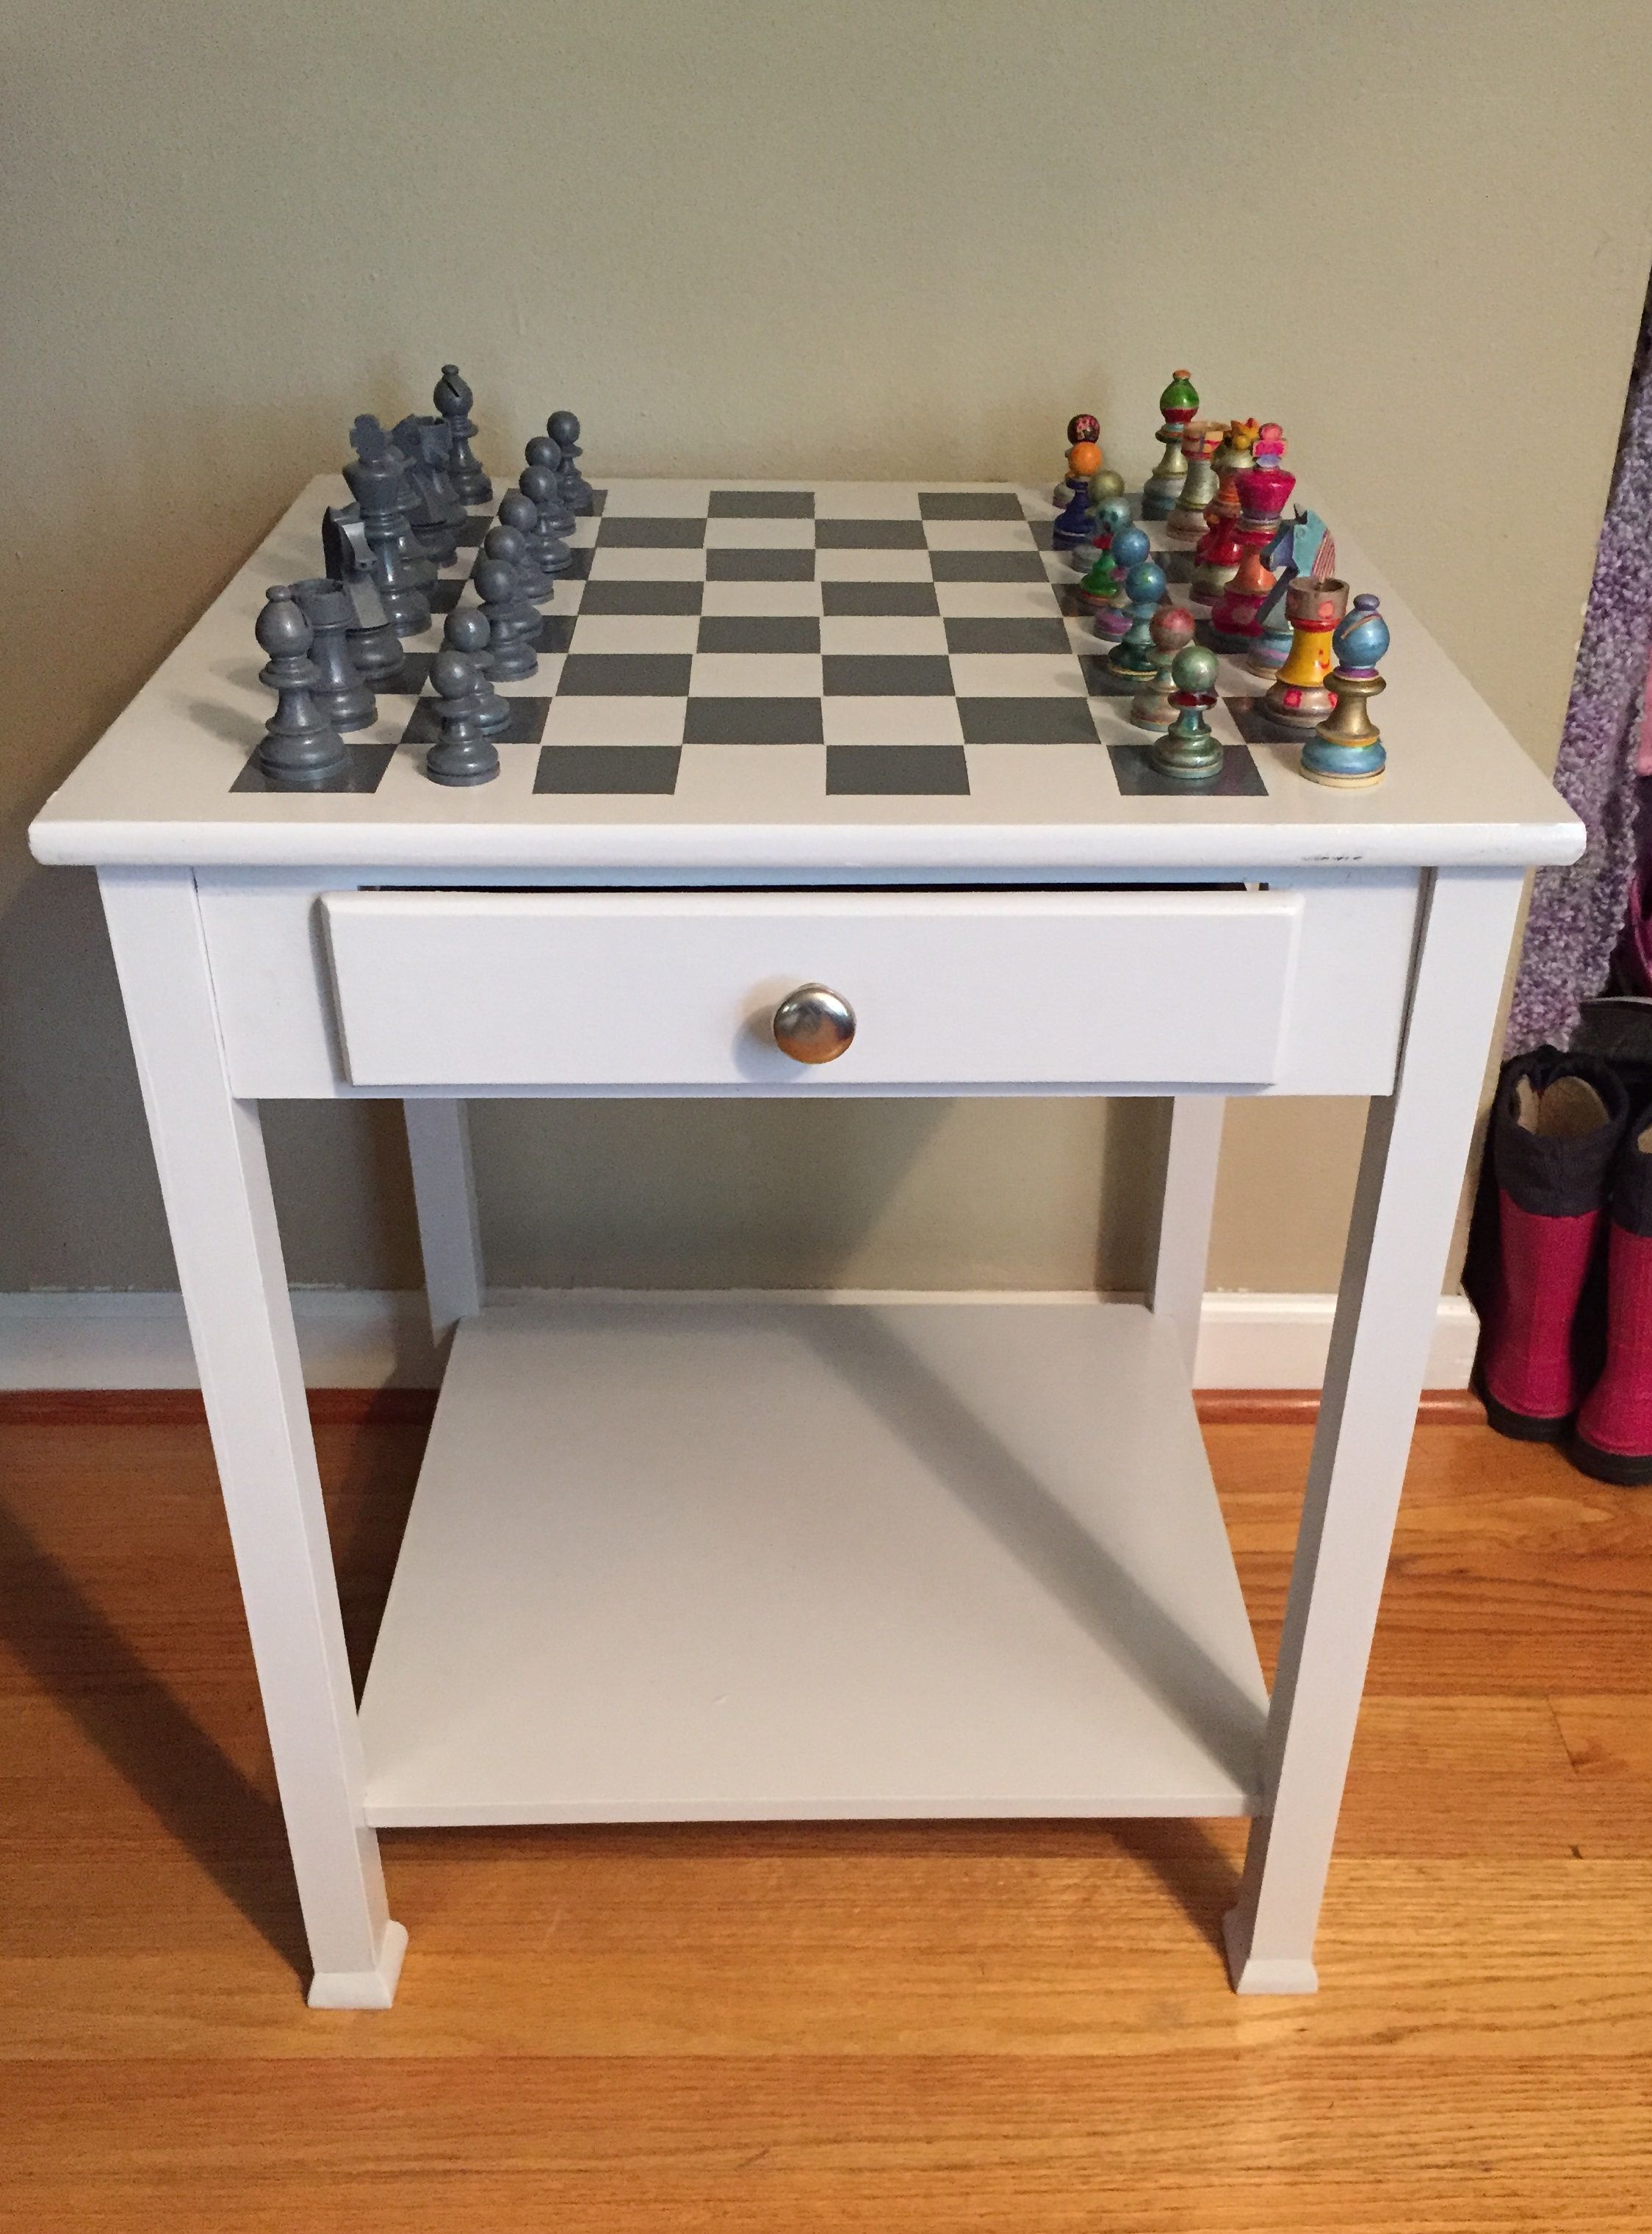 A thrift store table is turned into a creative Children's chess table   The Salvaged Boutique - A thrift store table is turned into a creative Children's chess table   The Salvaged Boutique -   18 thrift store diy Furniture ideas